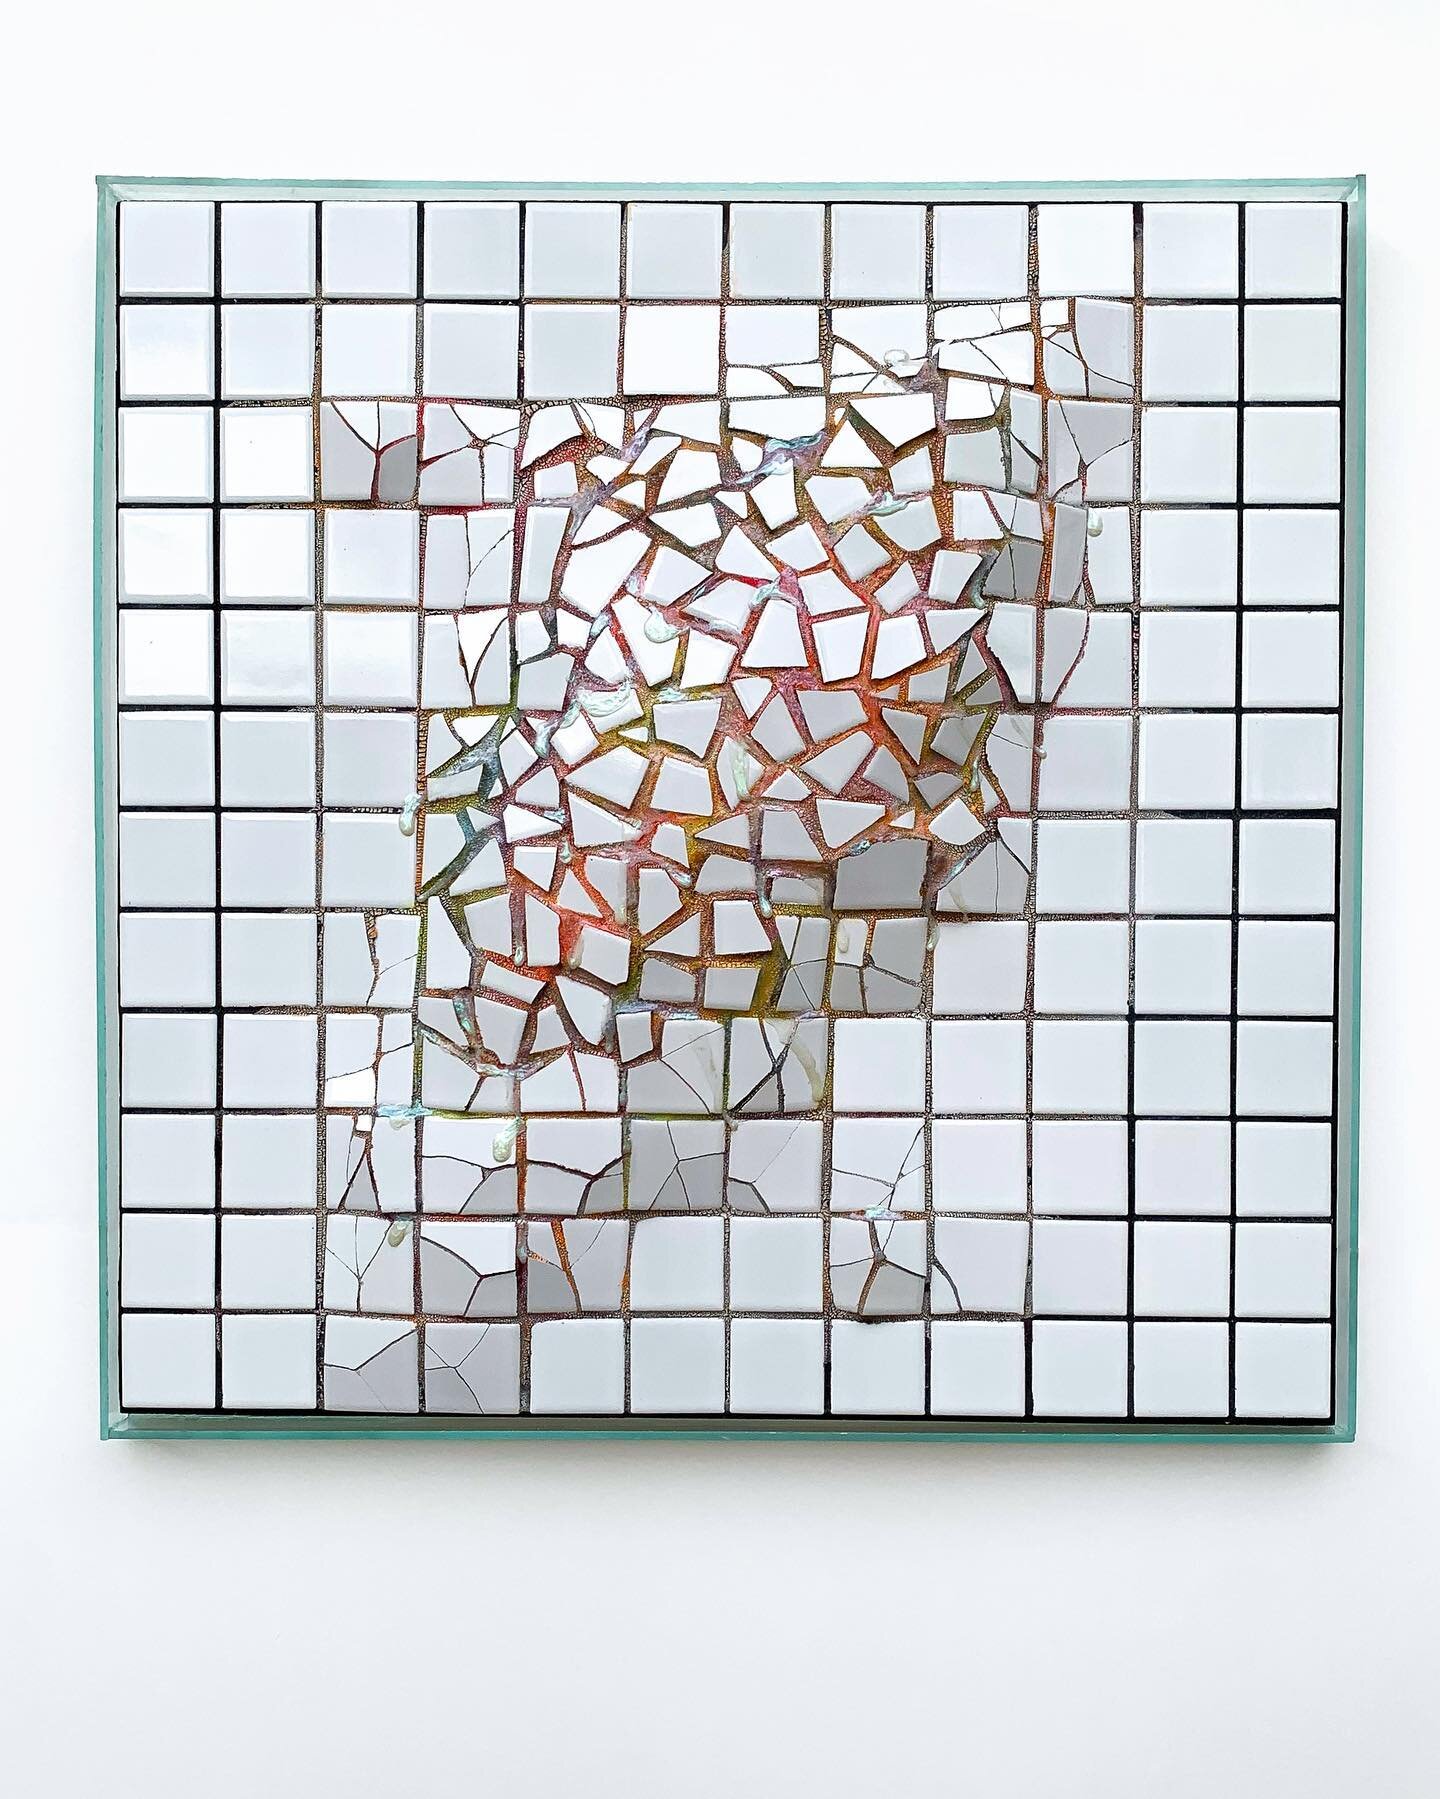 Last chance to see this piece at the Sierra Arts Riverside gallery for the #pride 🌈 exhibition! Be sure to check it out in-person with all of the other incredible art today and Saturday. @sierraarts 

Tears
2022
24 x 24 inches
Ceramic tile, grout, a